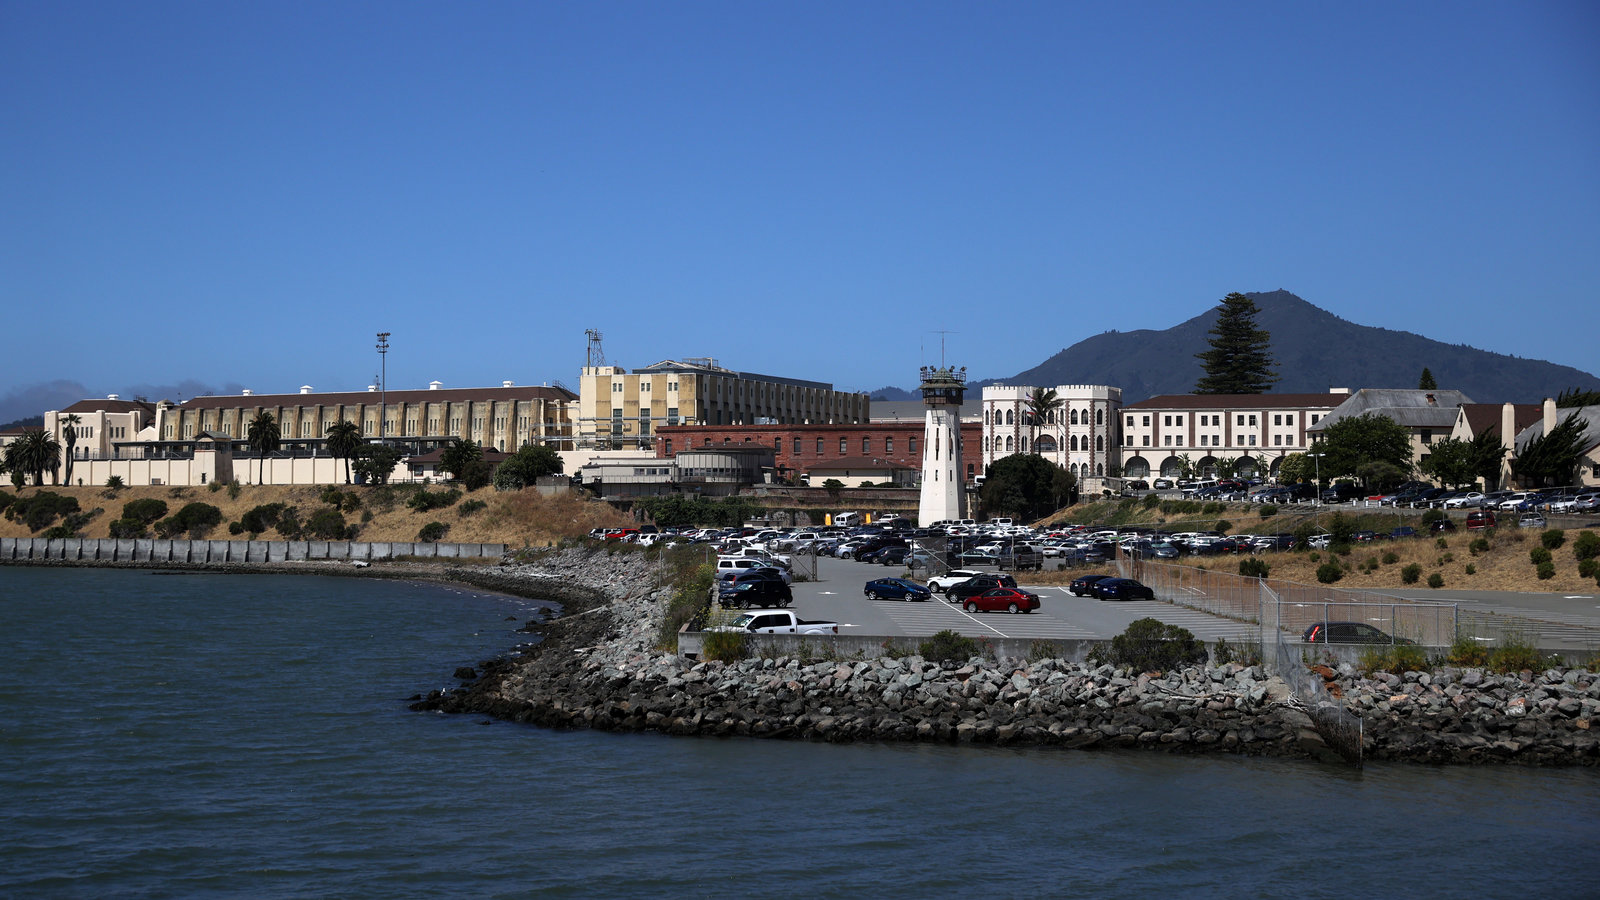 San Quentin State Prison Wallpapers